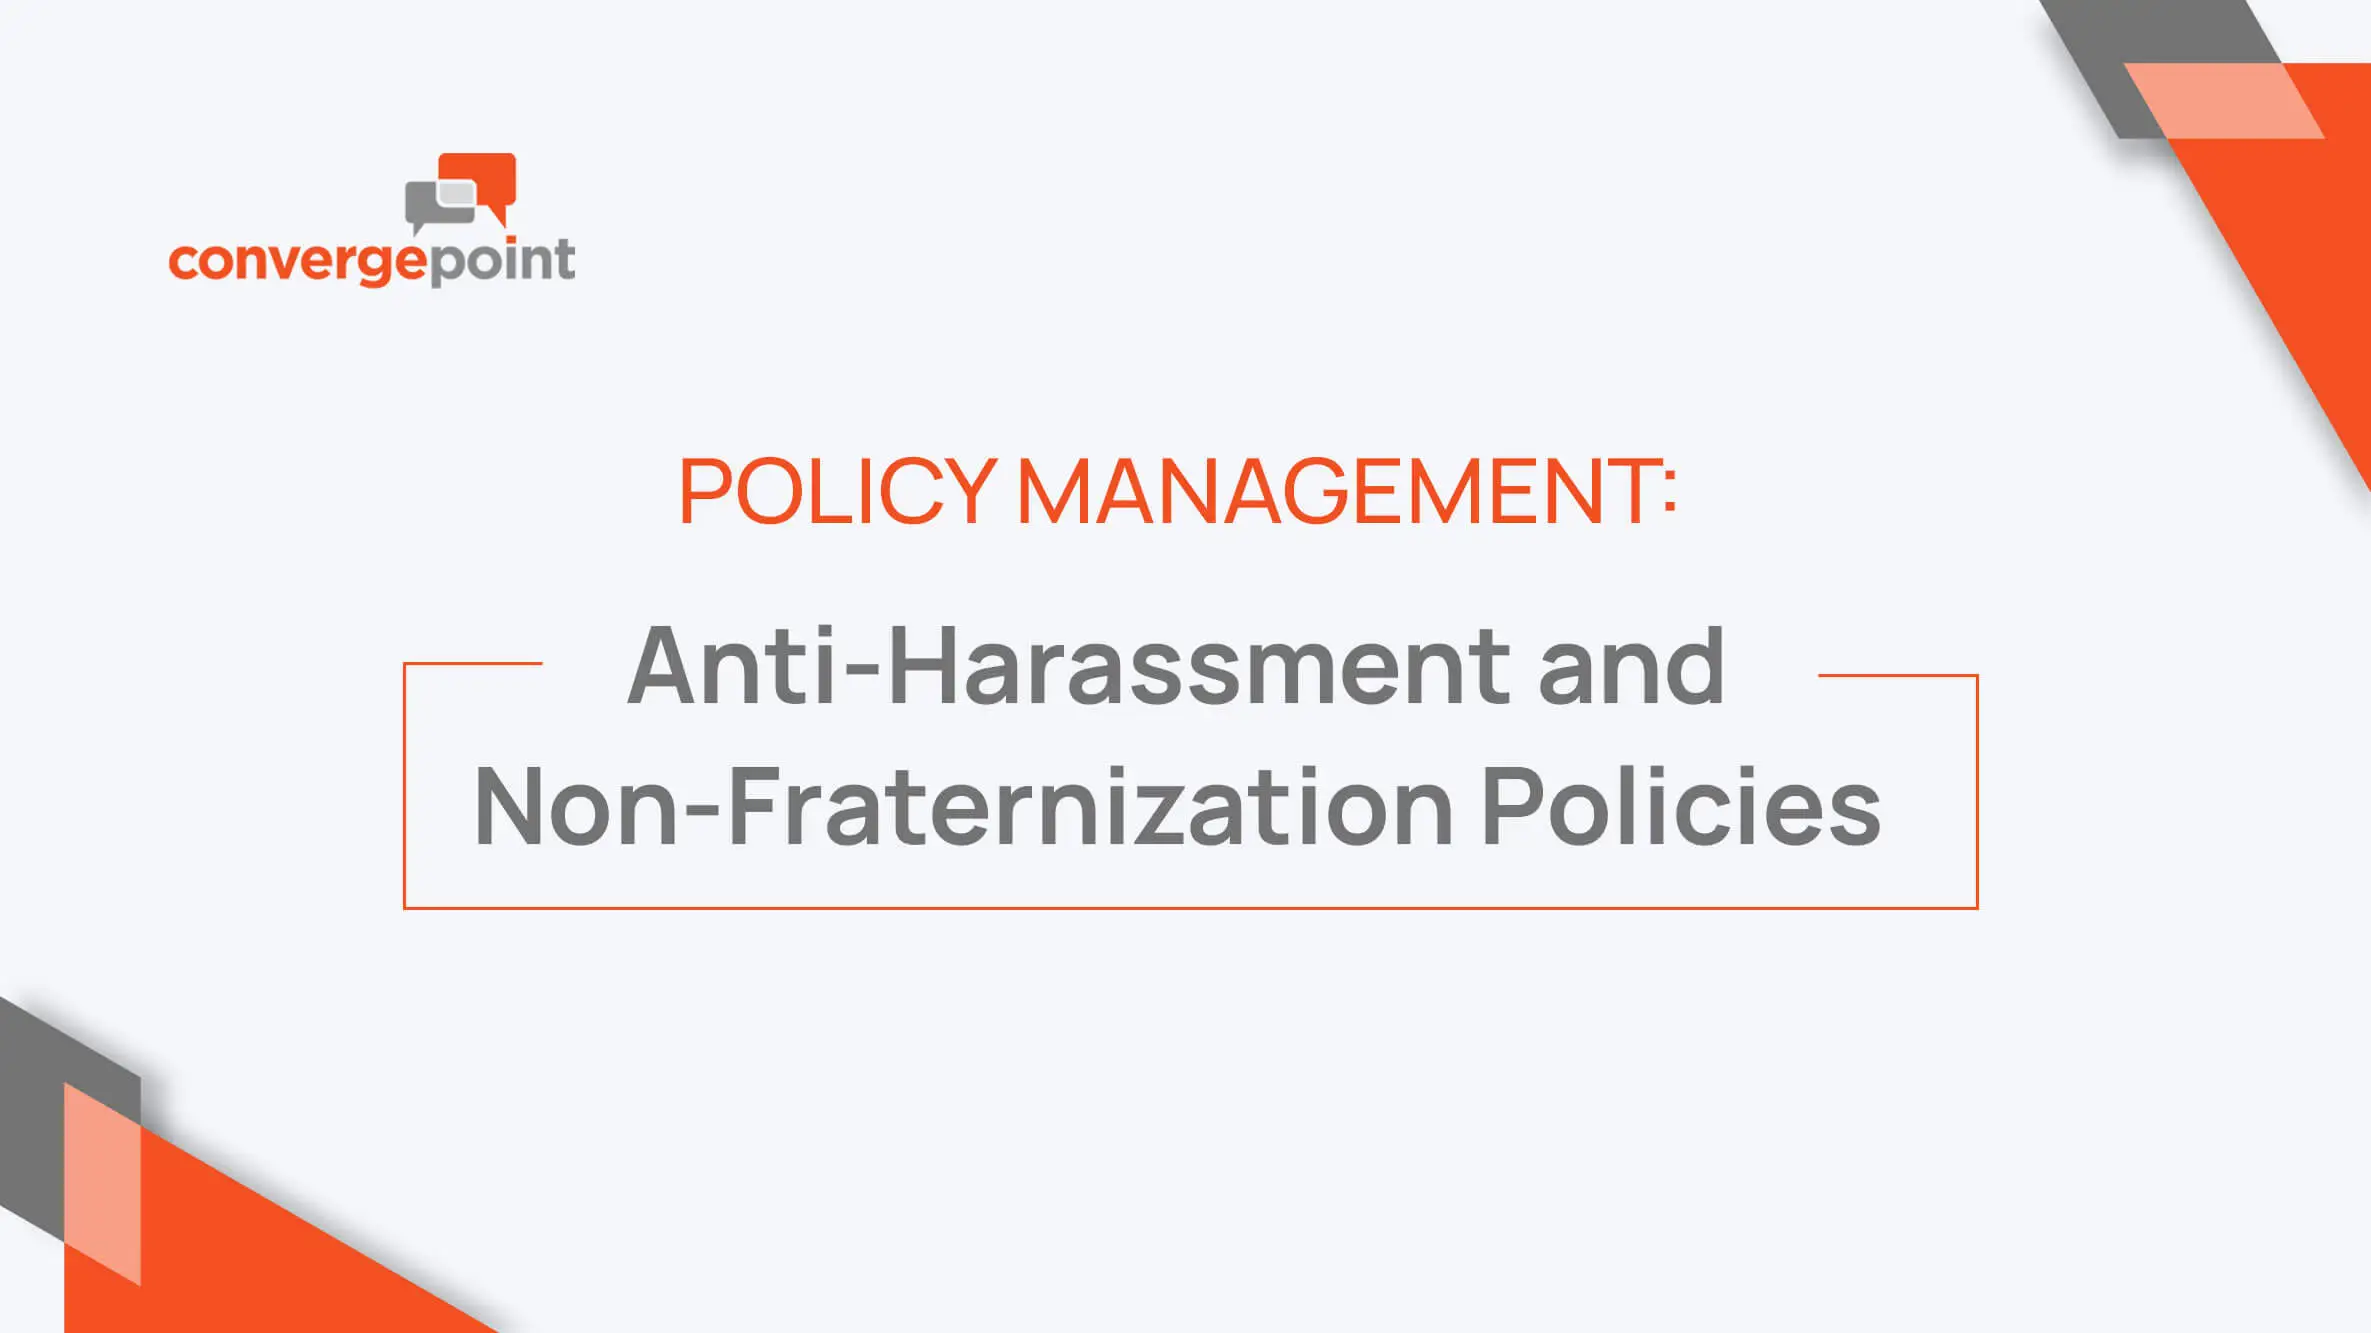 Anti-harassment and non-fraternization policies